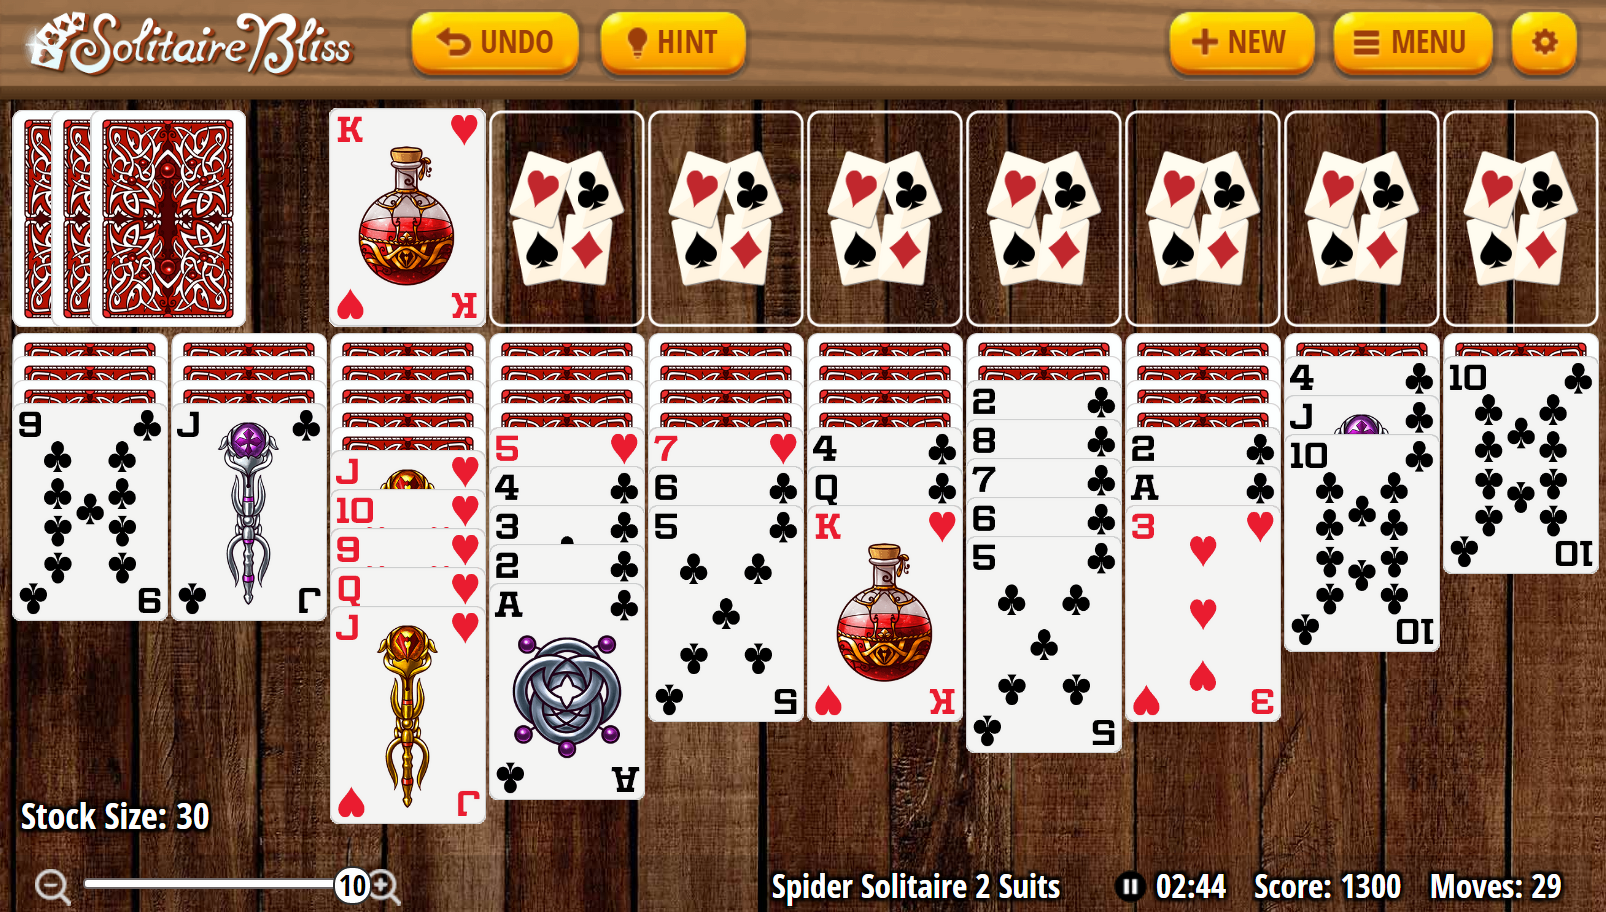 Play Spider Solitaire 2 Suits game online for free